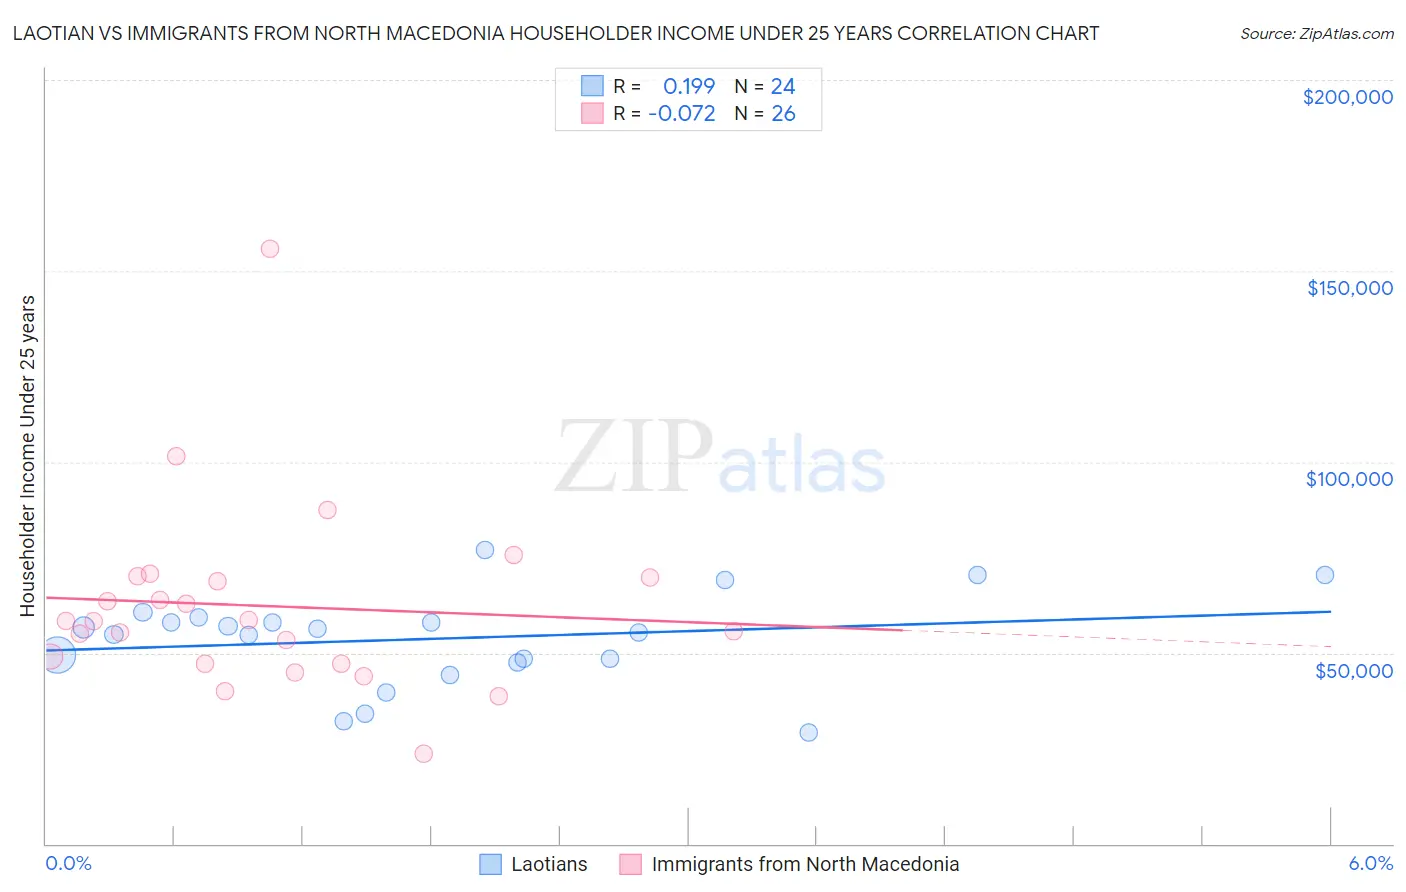 Laotian vs Immigrants from North Macedonia Householder Income Under 25 years